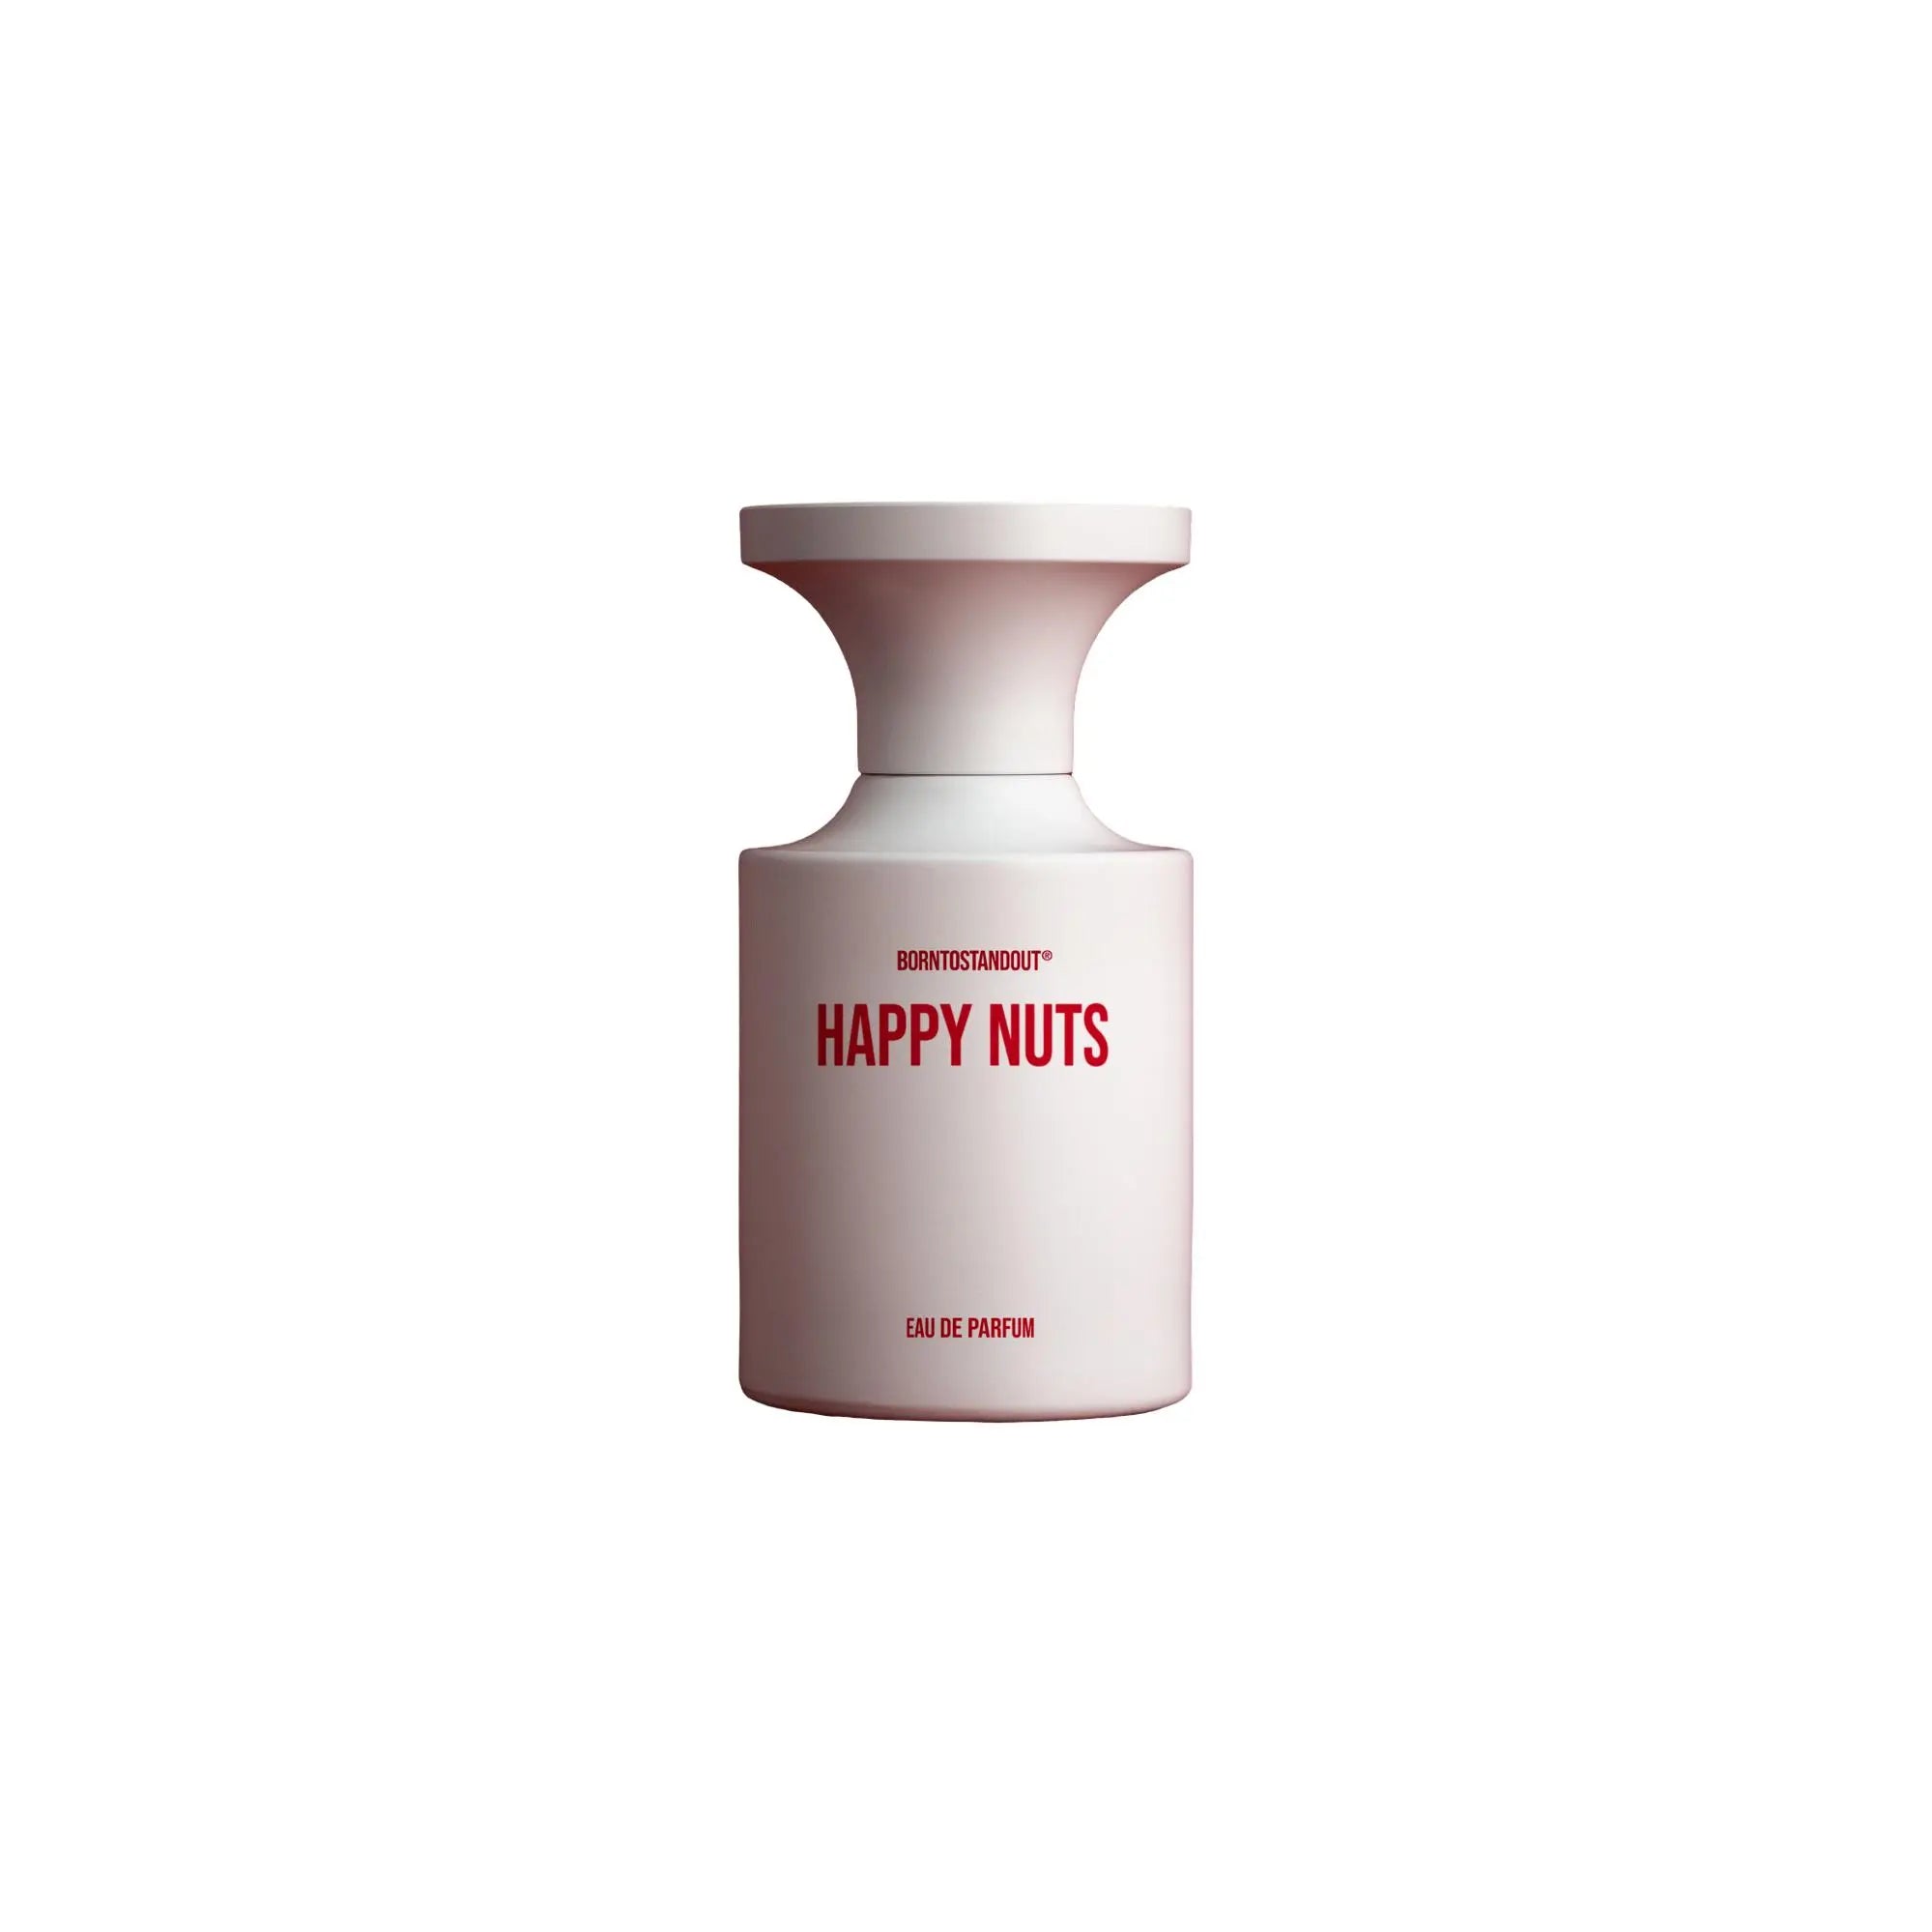 Born to stand out Nueces Felices - 50ml